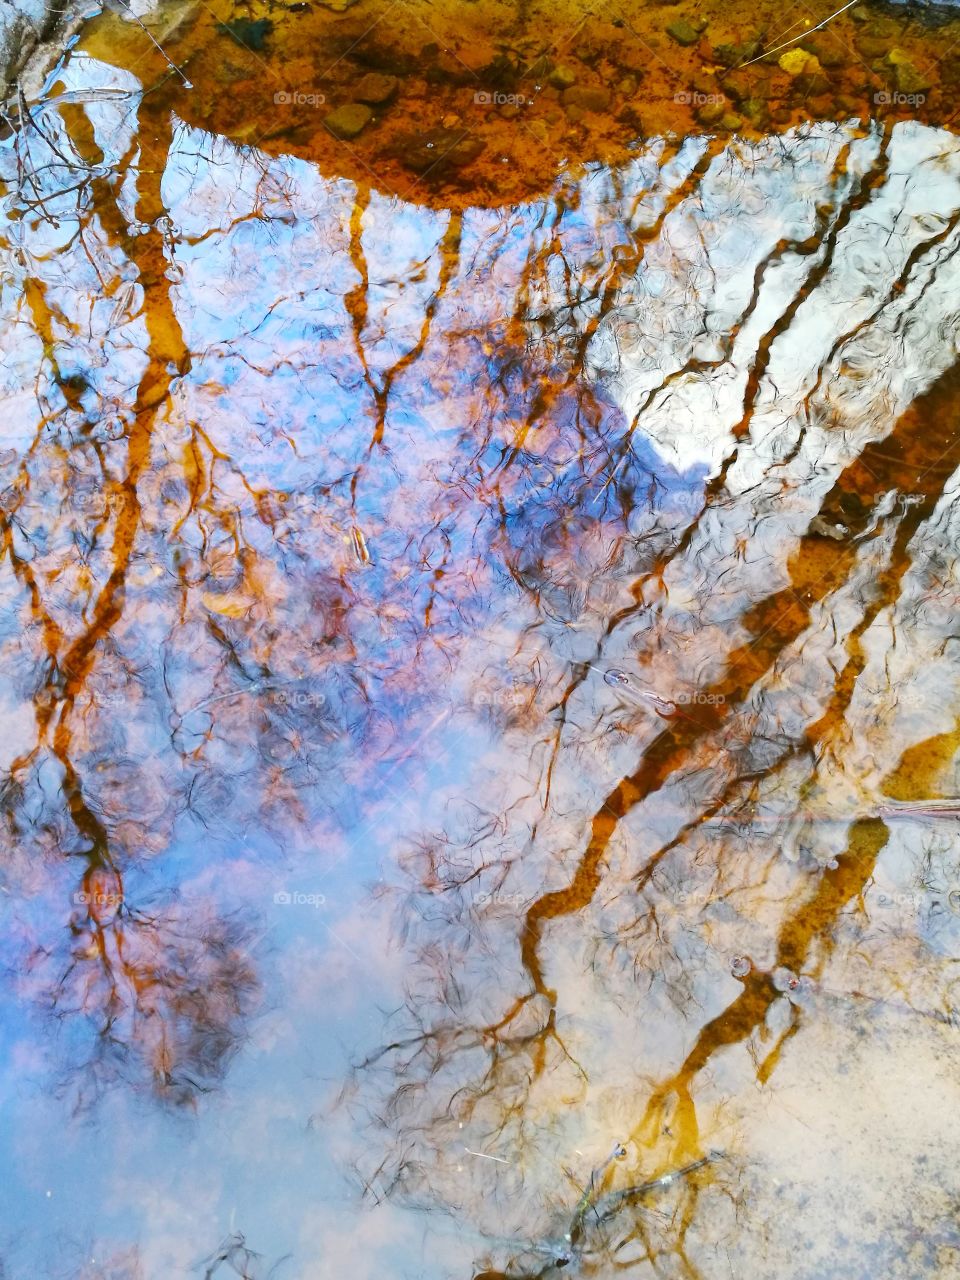 reflection of trees in winter